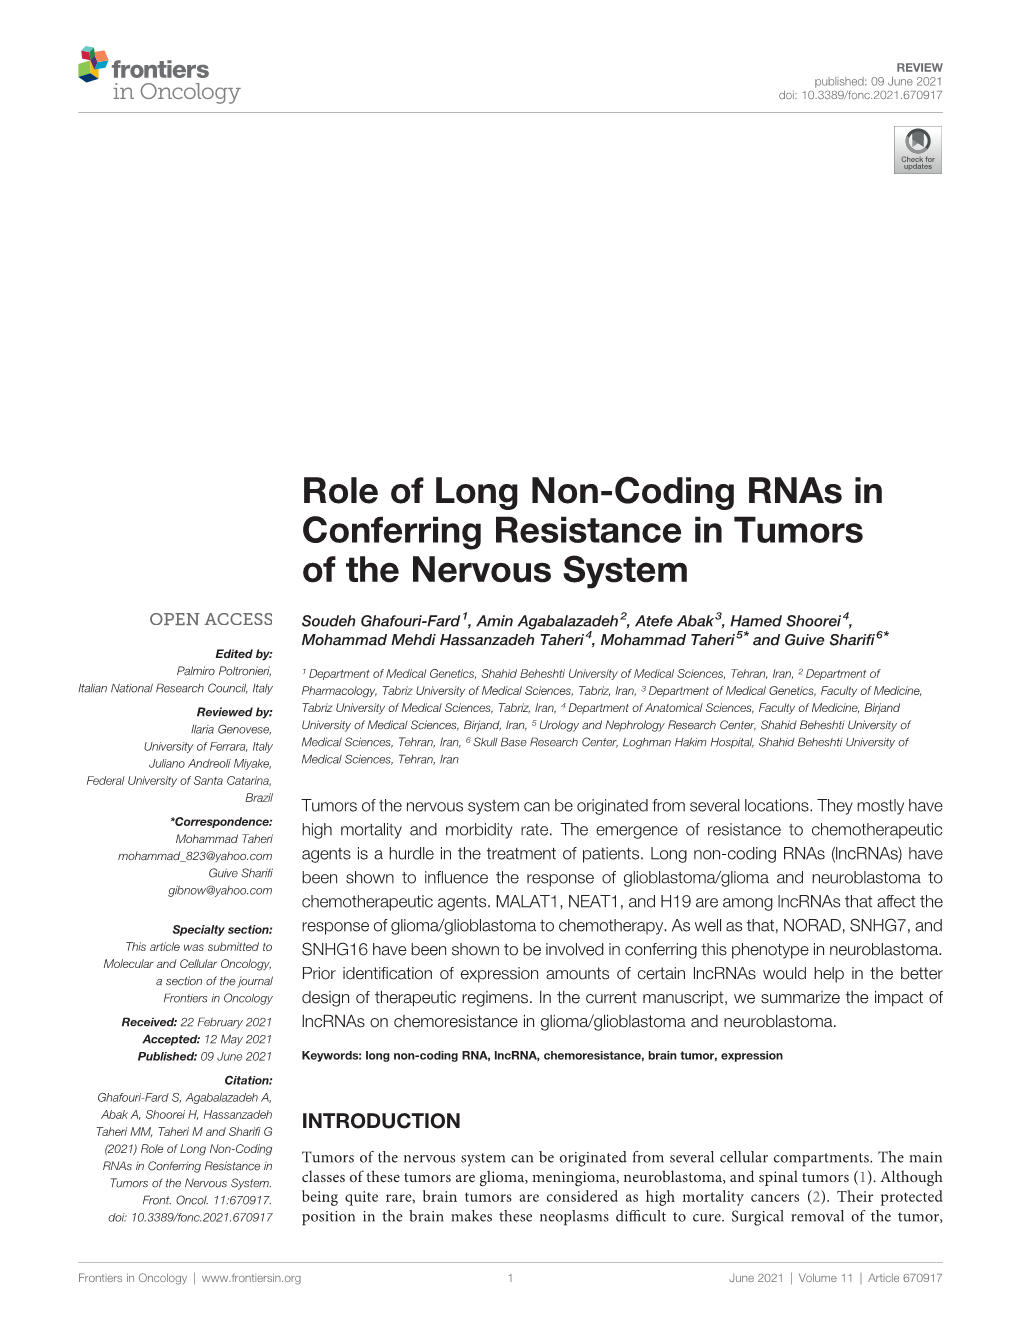 Role of Long Non-Coding Rnas in Conferring Resistance in Tumors of the Nervous System